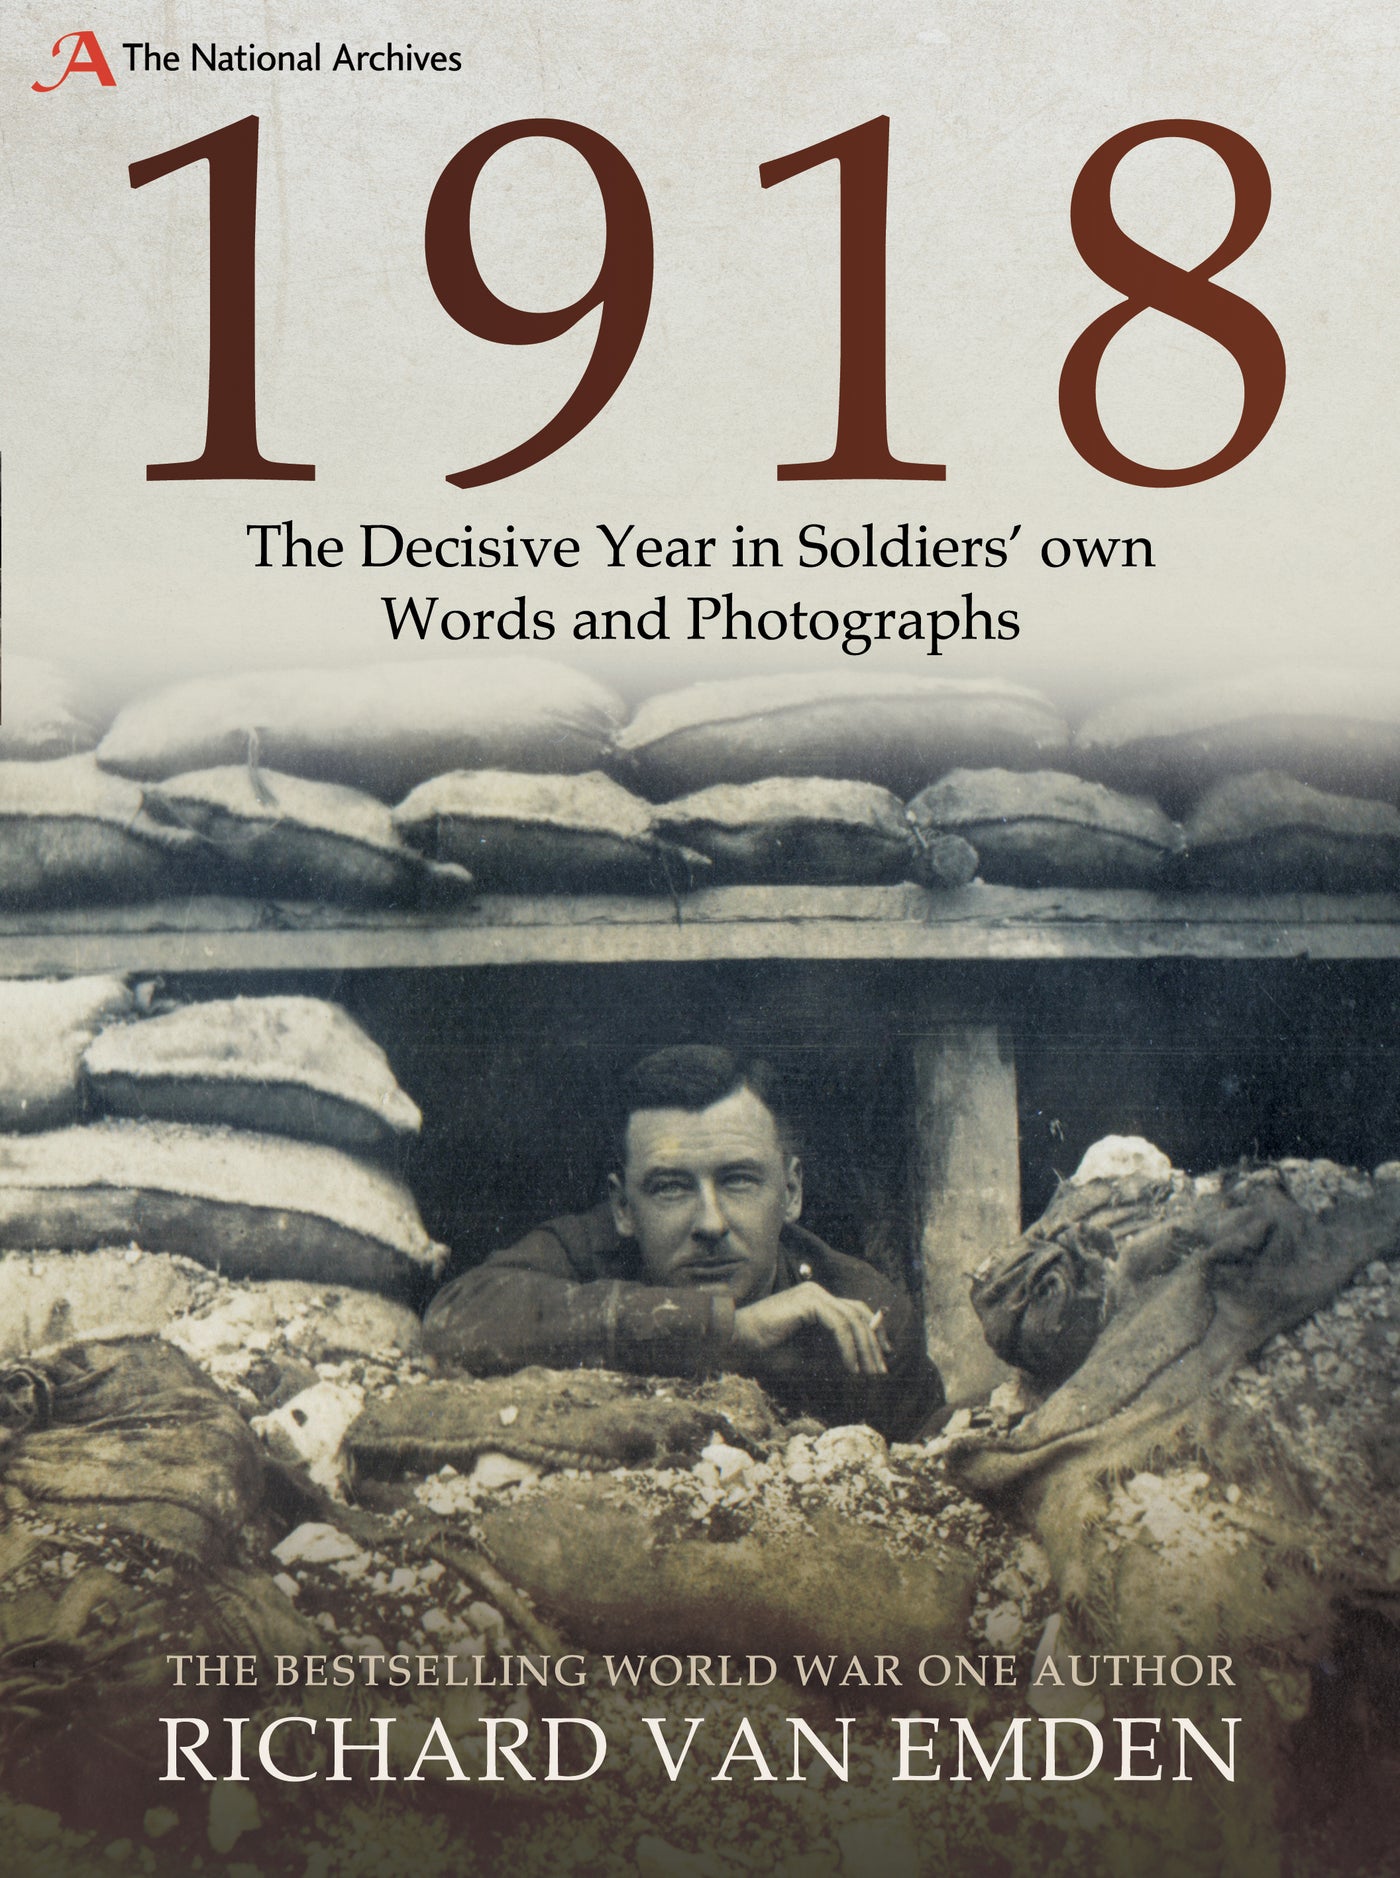 1918: The Decisive Year in Soldiers' own Words and Photographs